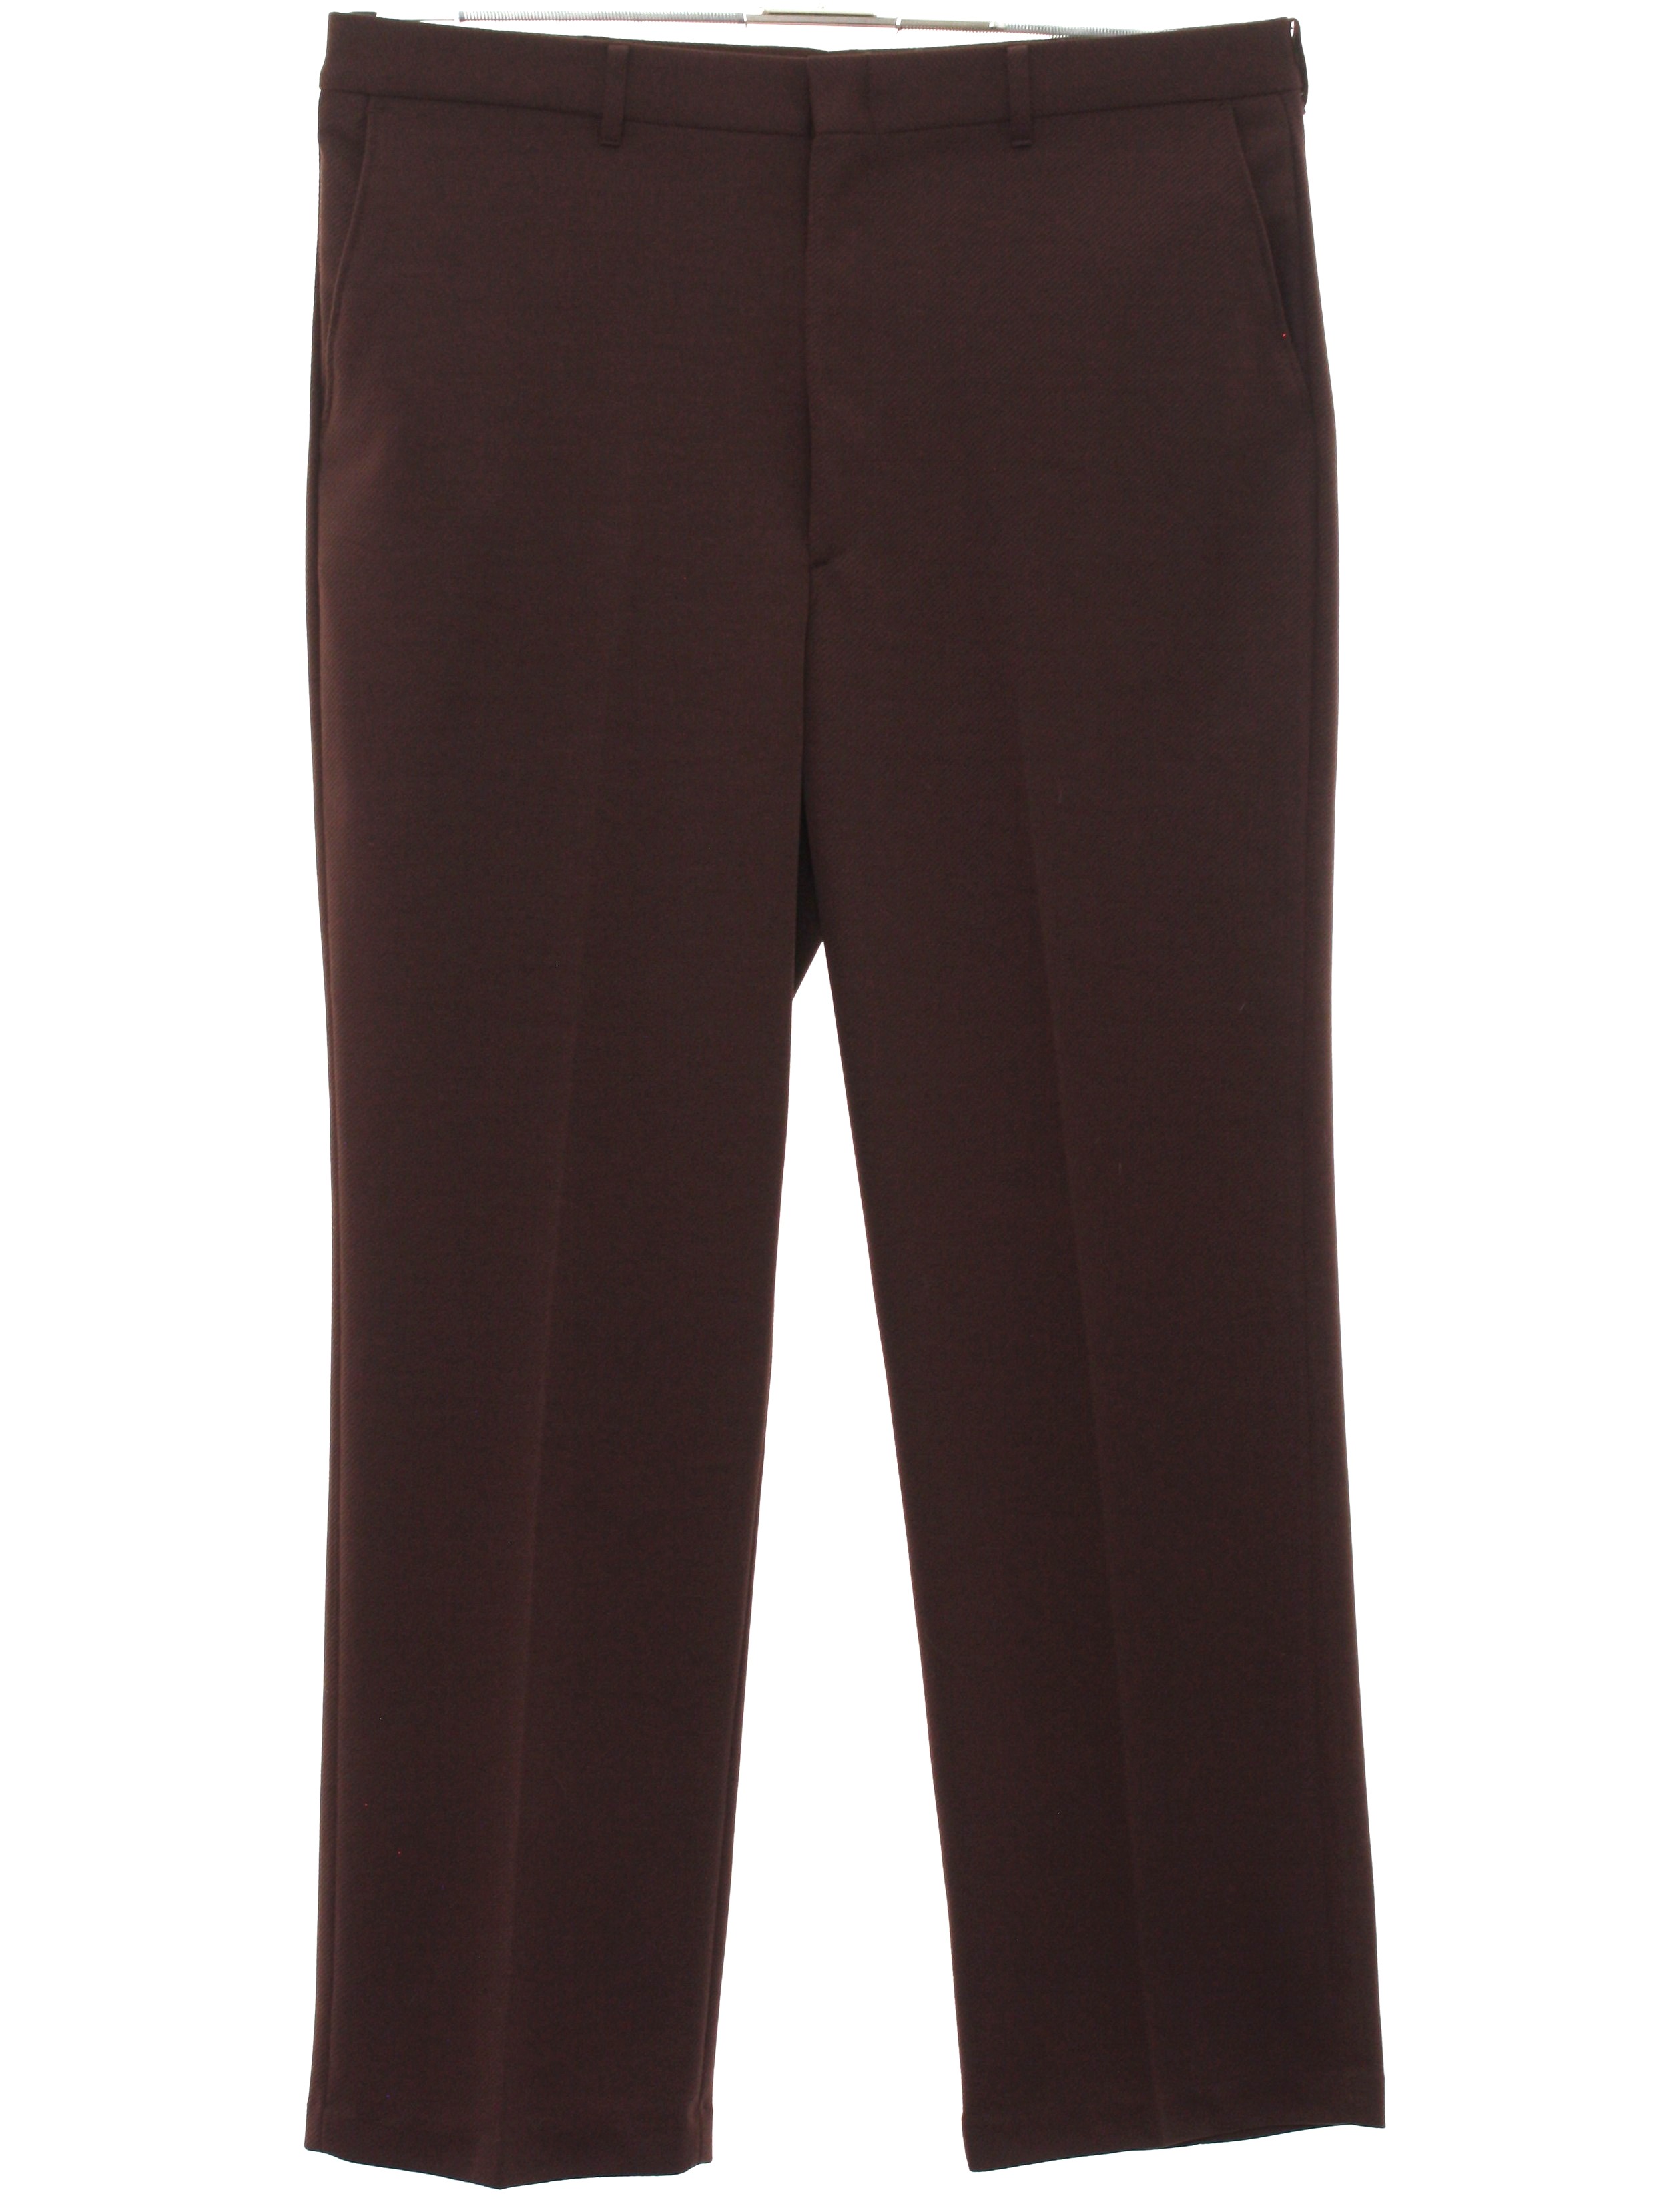 1970s Haband Pants: Late 70s -Haband- Mens dark brow solid colored ...